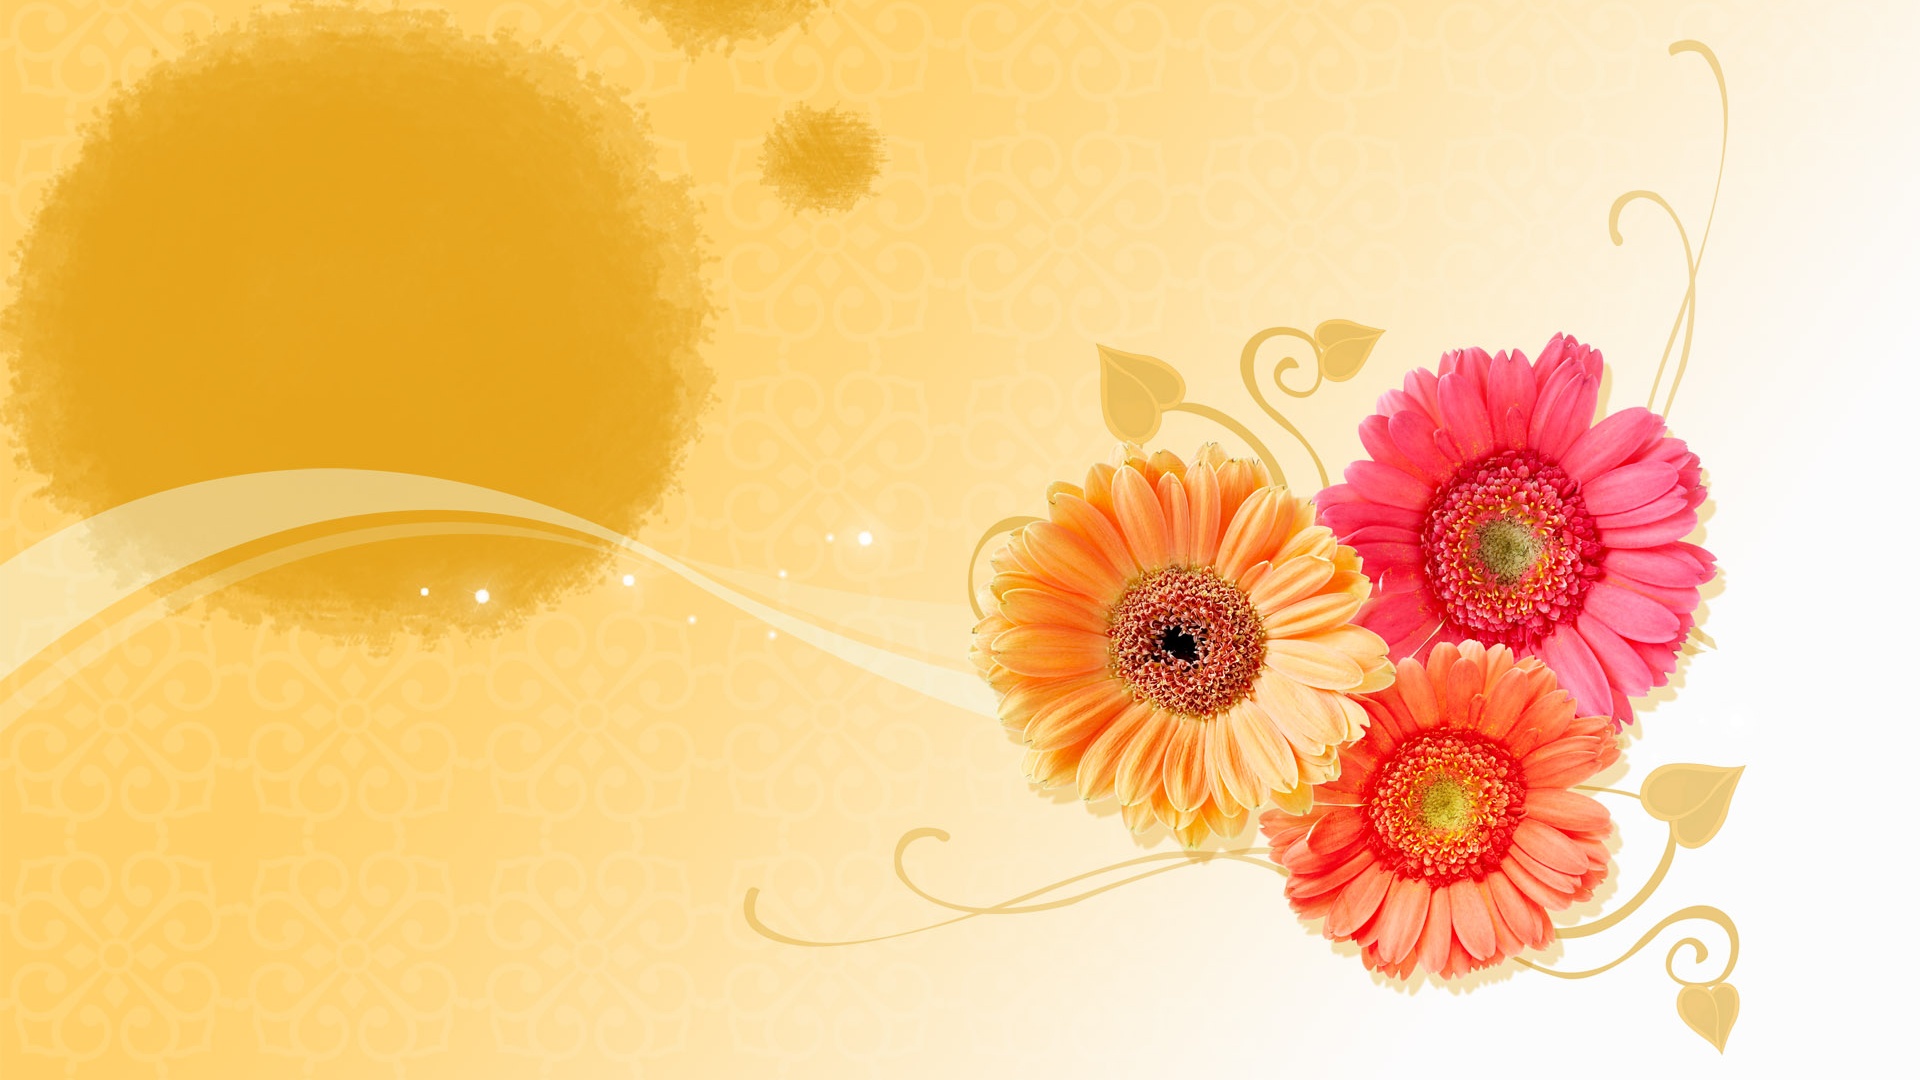 wallpaper details file name may flowers wallpaper uploaded by pulicey 1920x1080